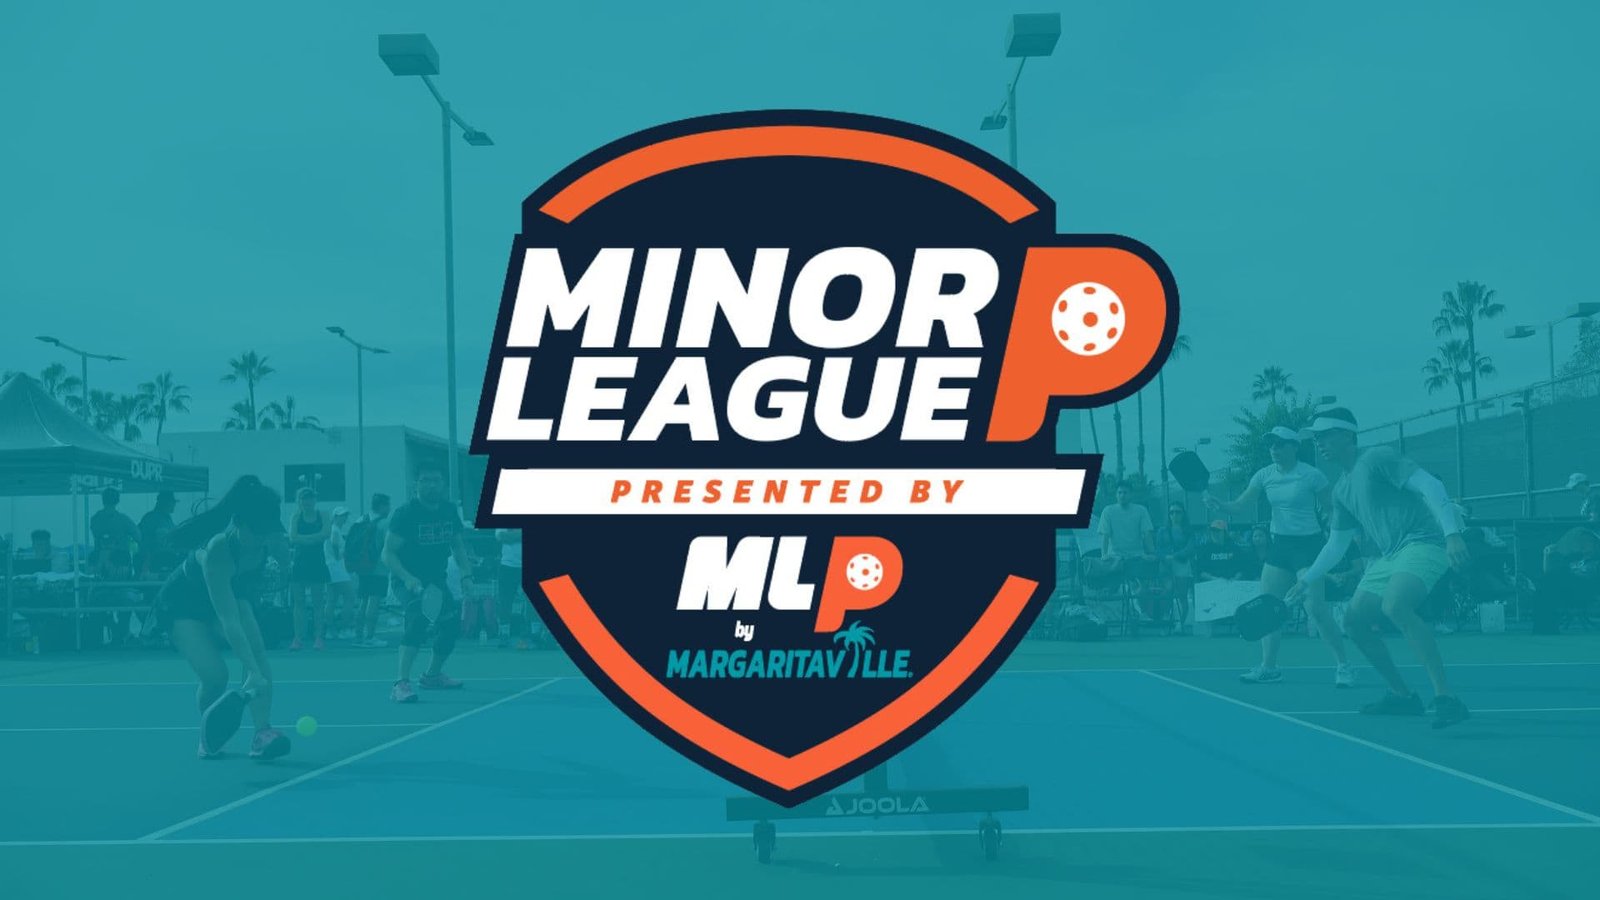 Major League Pickleball and DUPR Partner to Launch MLP’s Amateur Events Under The Dink Minor League Pickleball Brand